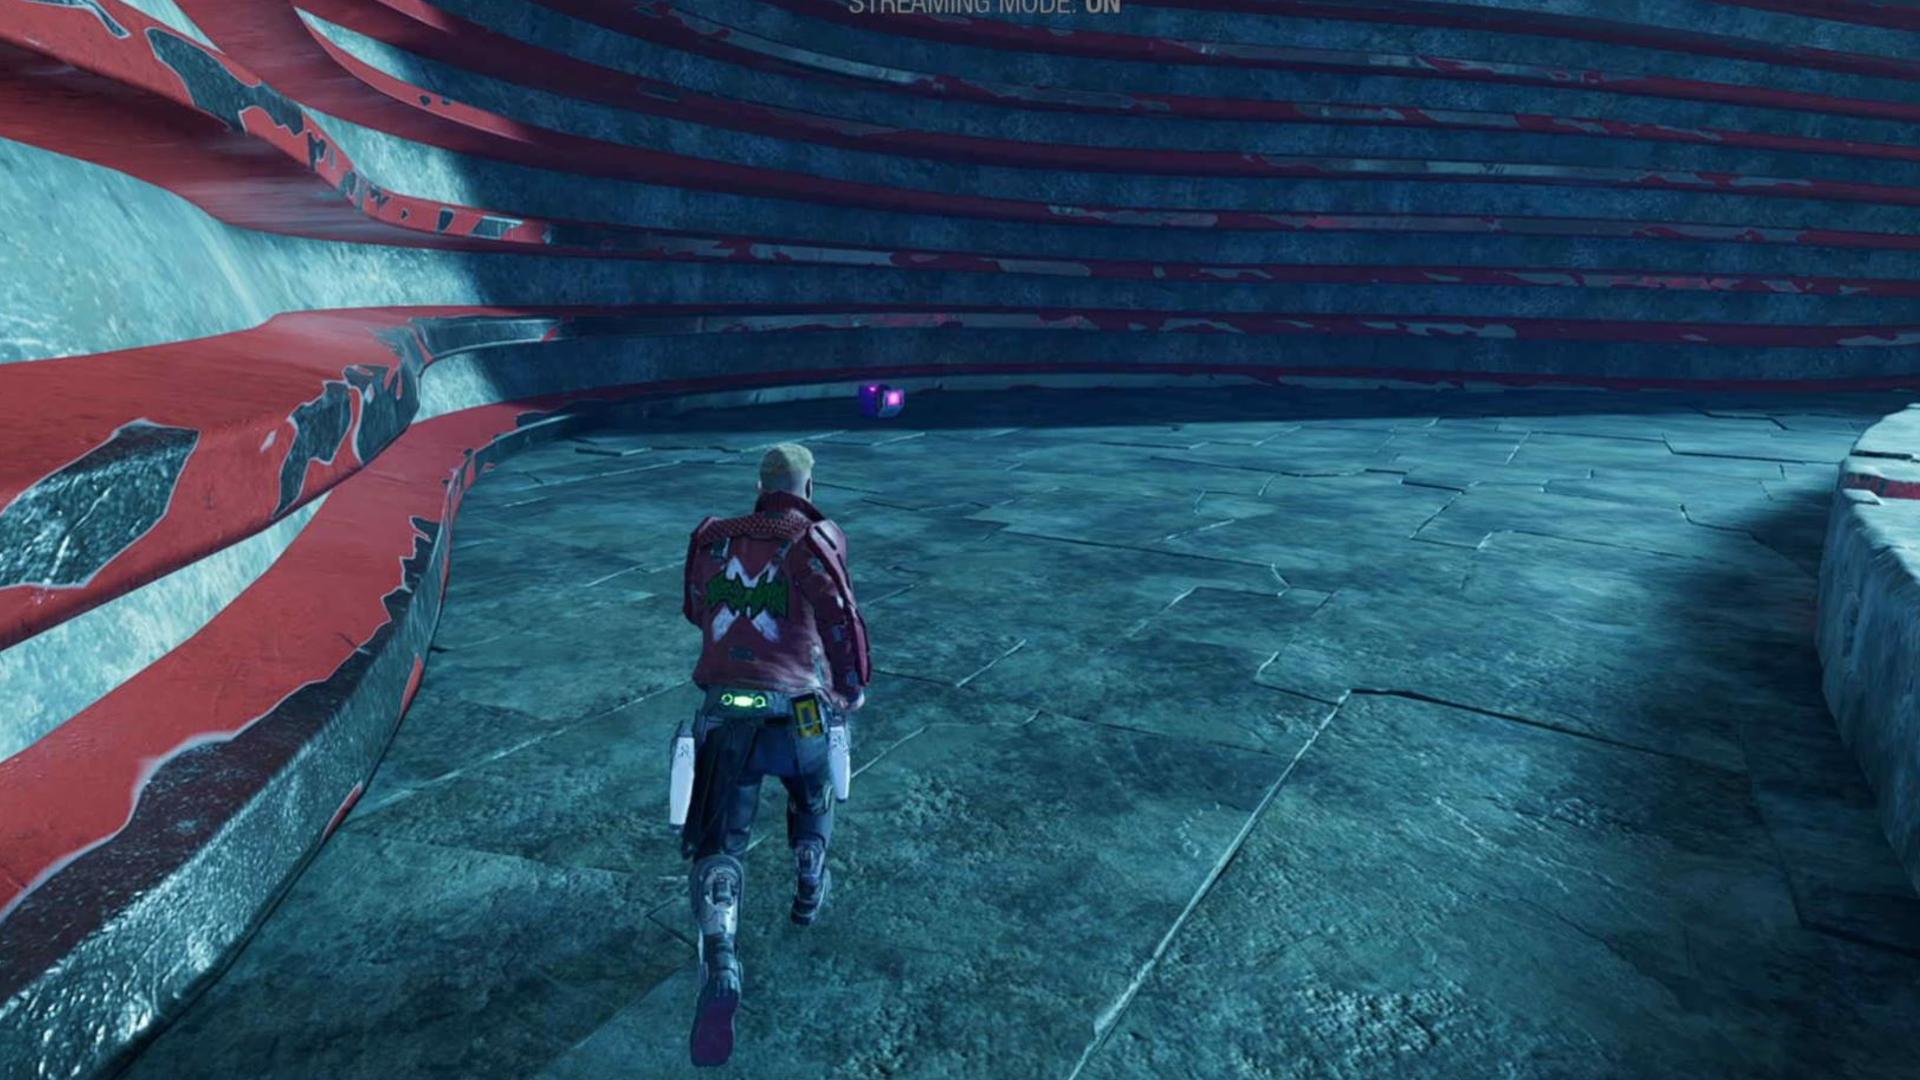 Guardians of the Galaxy outfit locations: Star-Lord is looking at the outfit box in the corner of Lady Hellbender's main chamber.